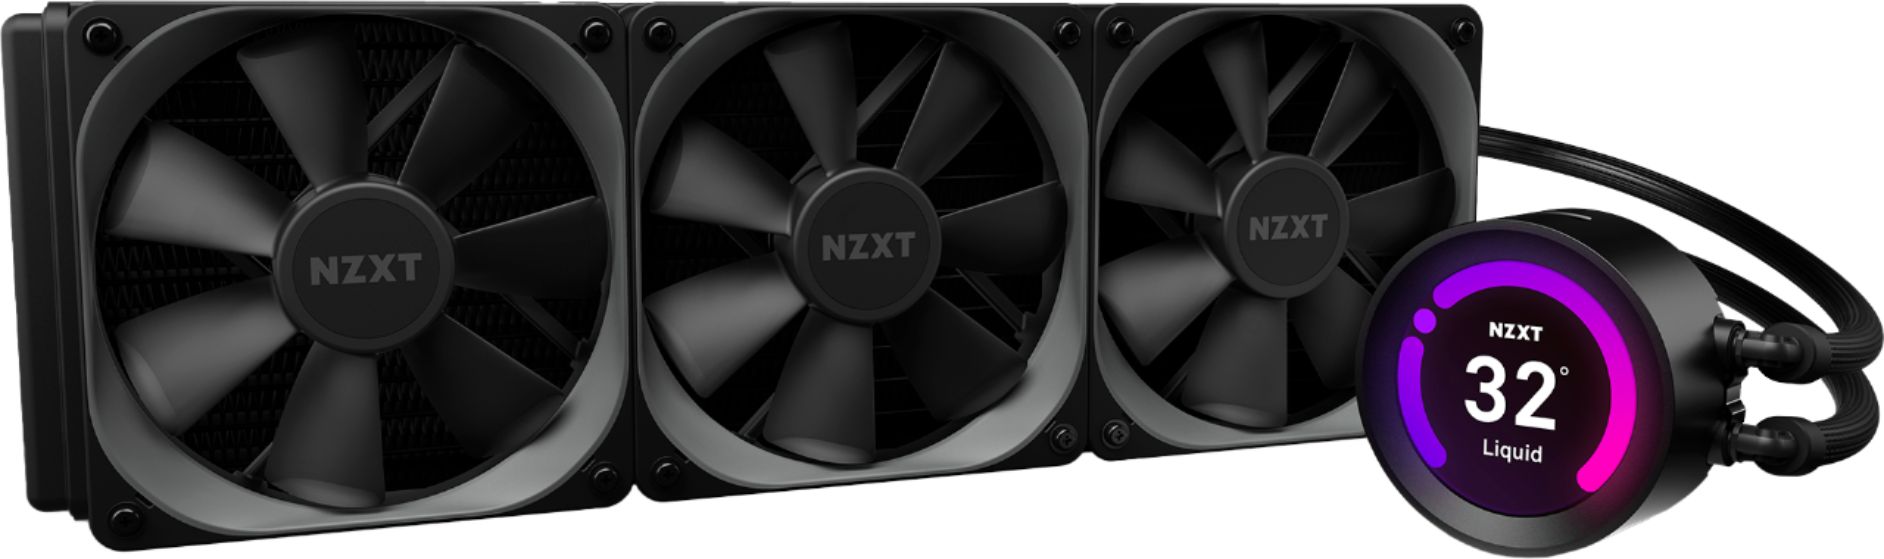 Photo 1 of NZXT Kraken Z73 360mm - RL-KRZ73-01 - AIO RGB CPU Liquid Cooler - Customizable LCD Display - Improved Pump - Powered by CAM V4 - RGB Connector - Aer P 120mm Radiator Fans (3 Included)